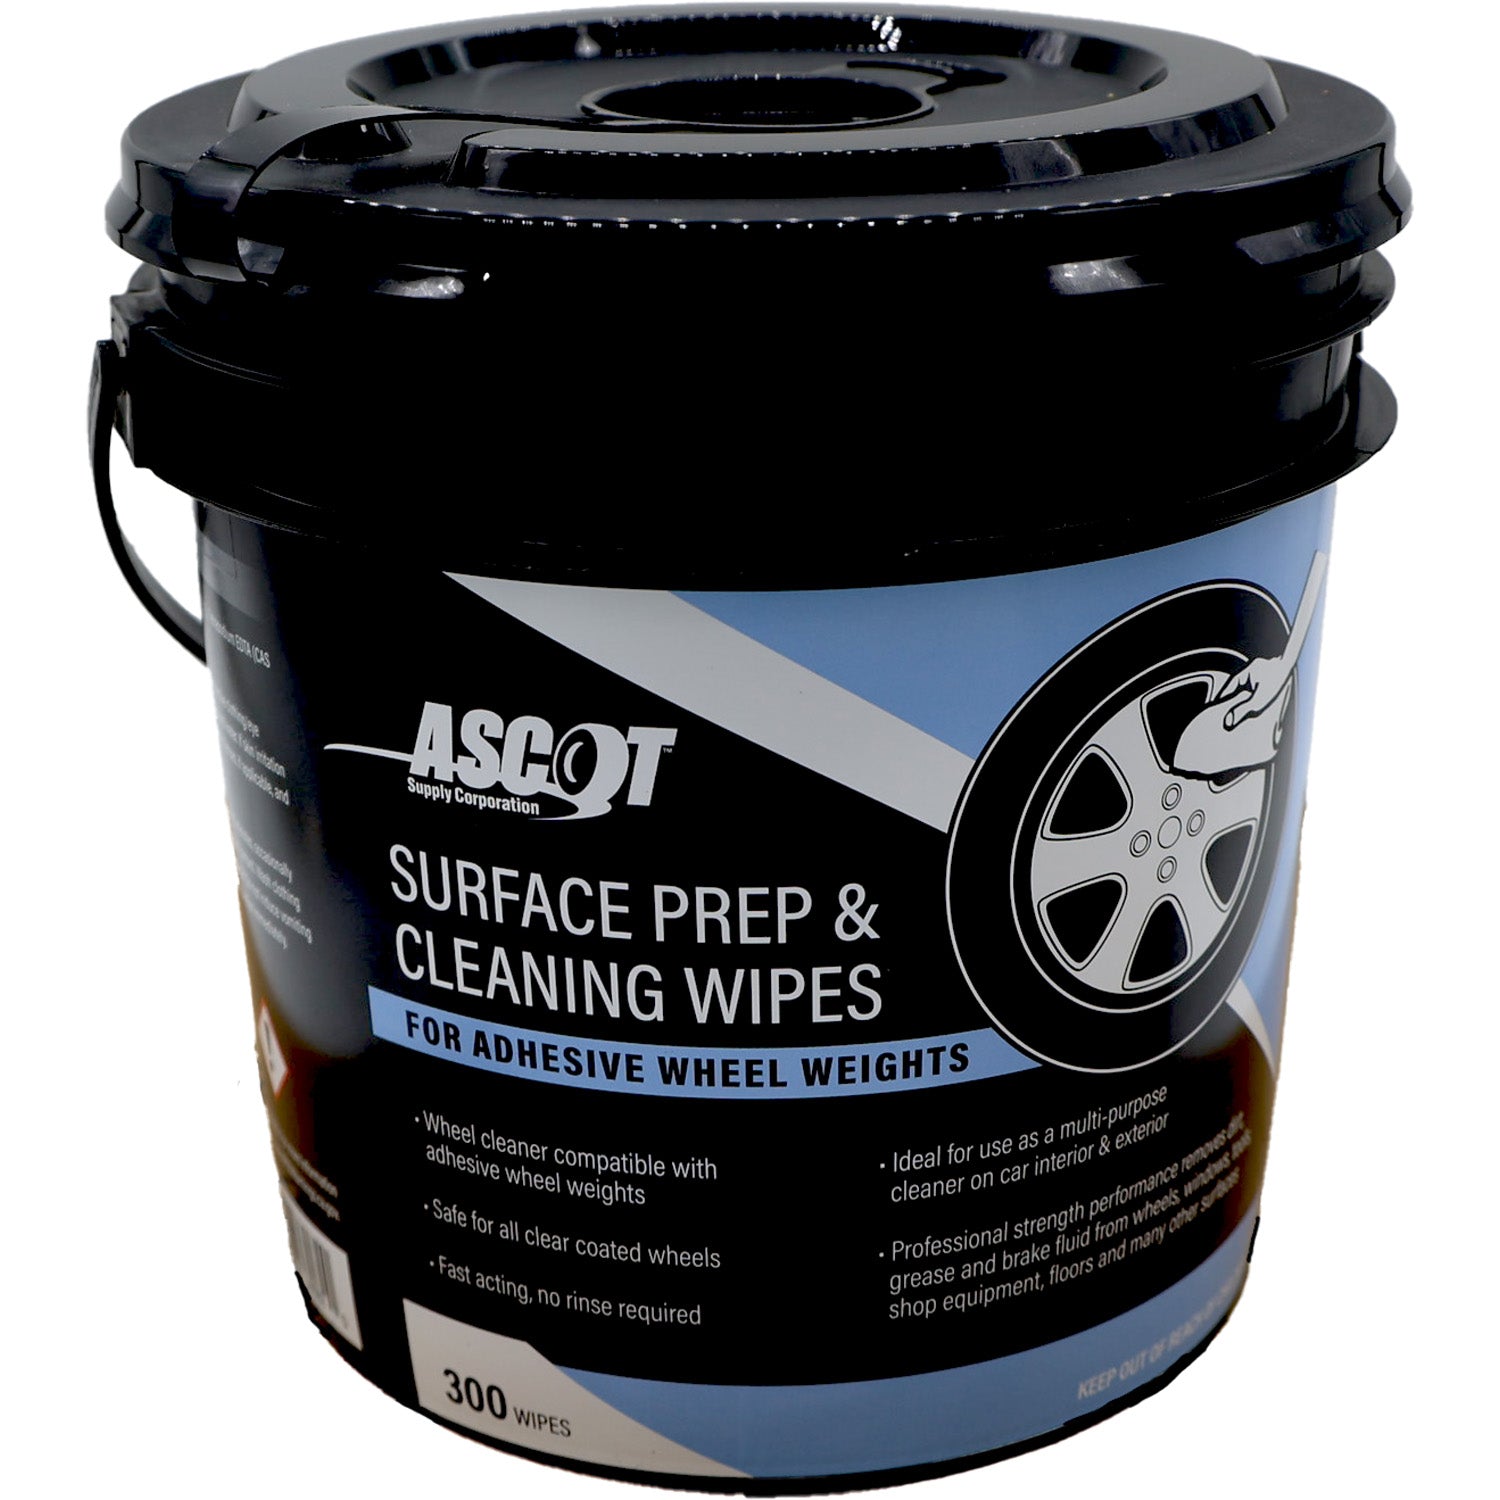 Ascot Surface and Prep Cleaning Wipes for Adhesive Wheel Weights - 300 Wipes